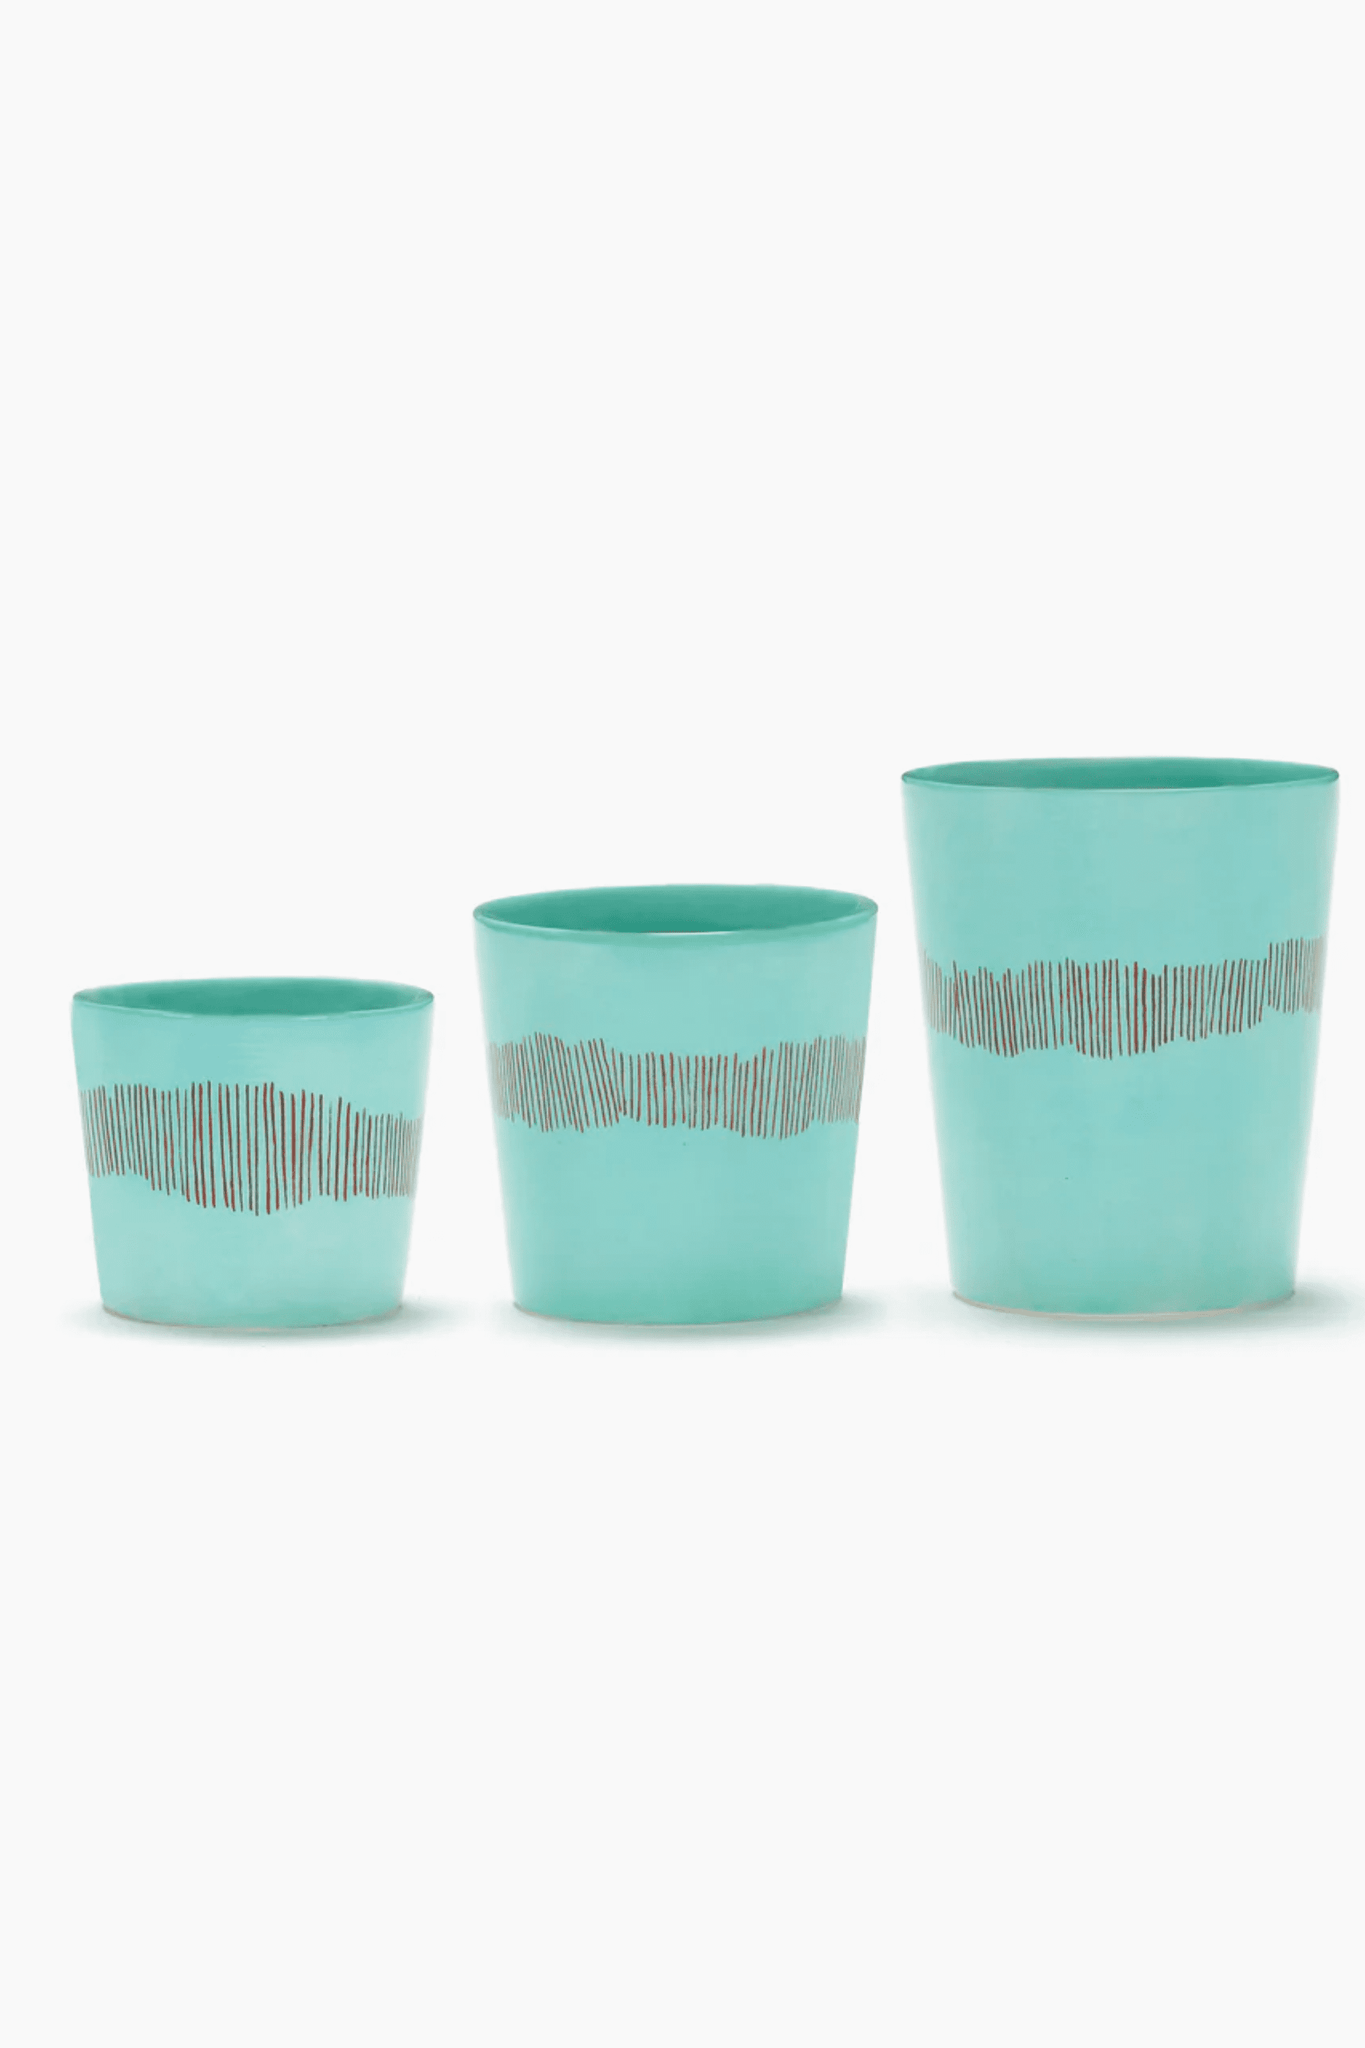 Set of 4 Coffee Cups, Azure Swirl with Red Stripes Ottolenghi Serax, shown in various sizes